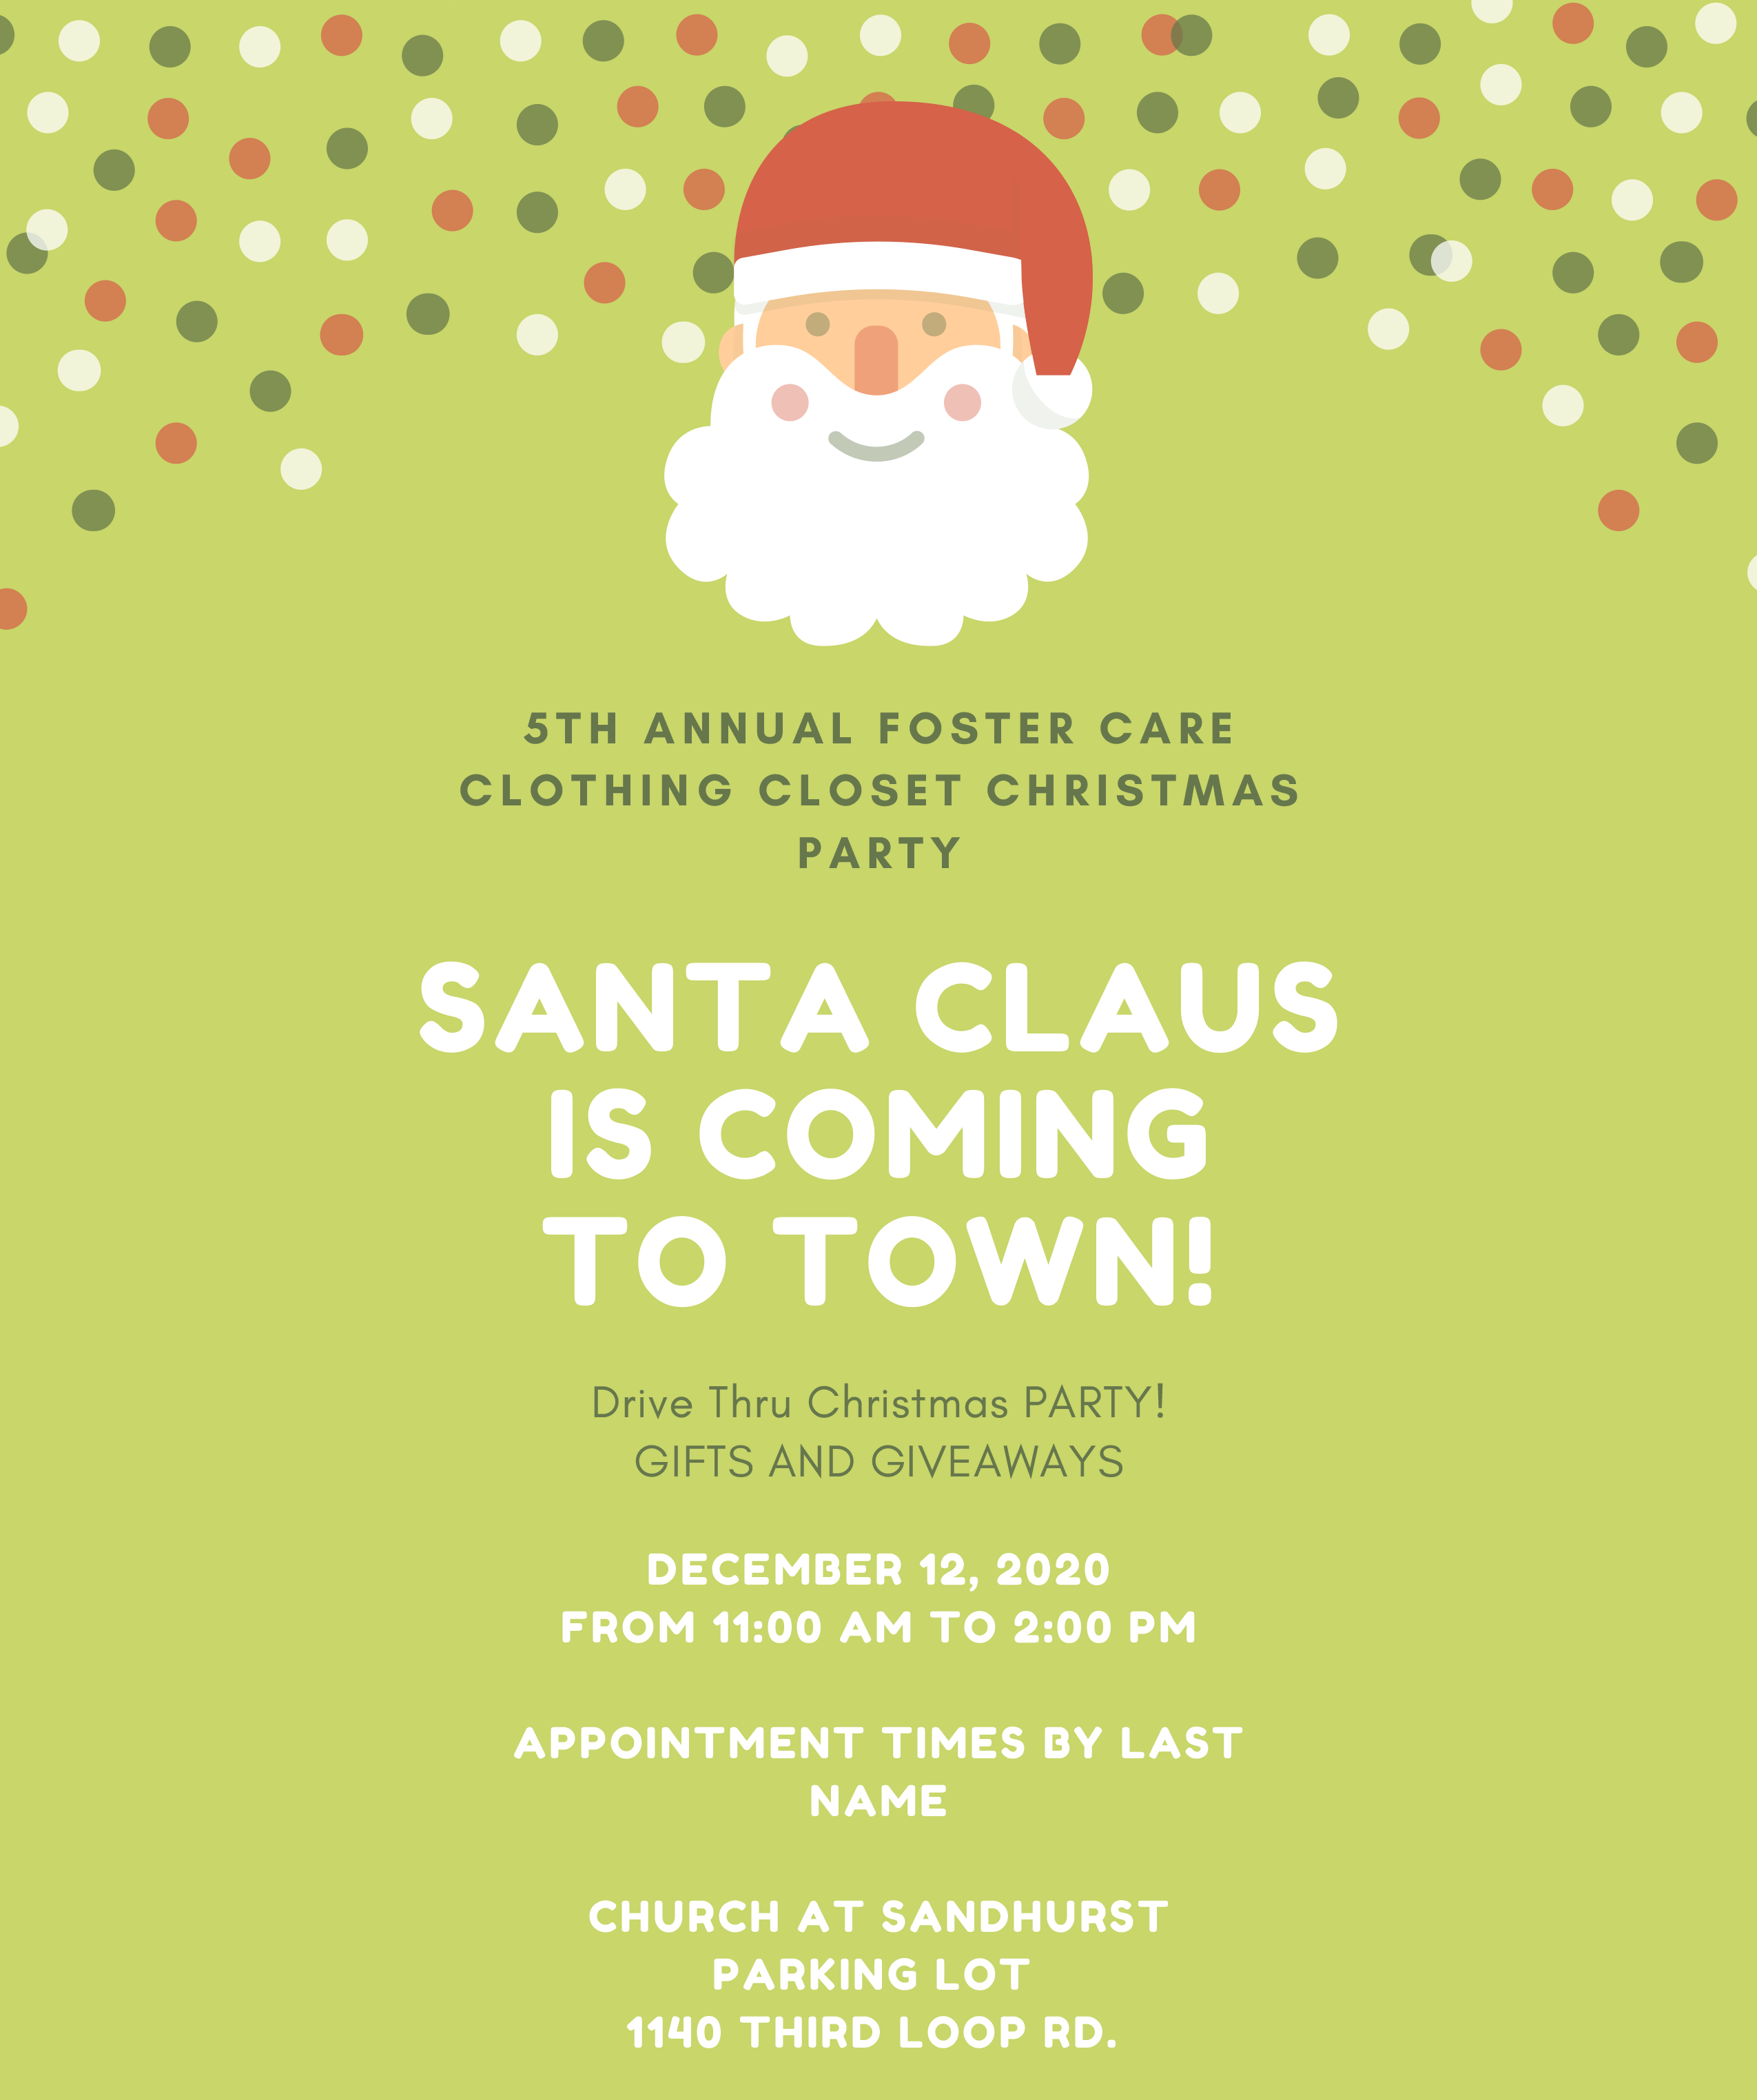 Drive Thru Christmas Party Registration - Foster Care Clothing Closet